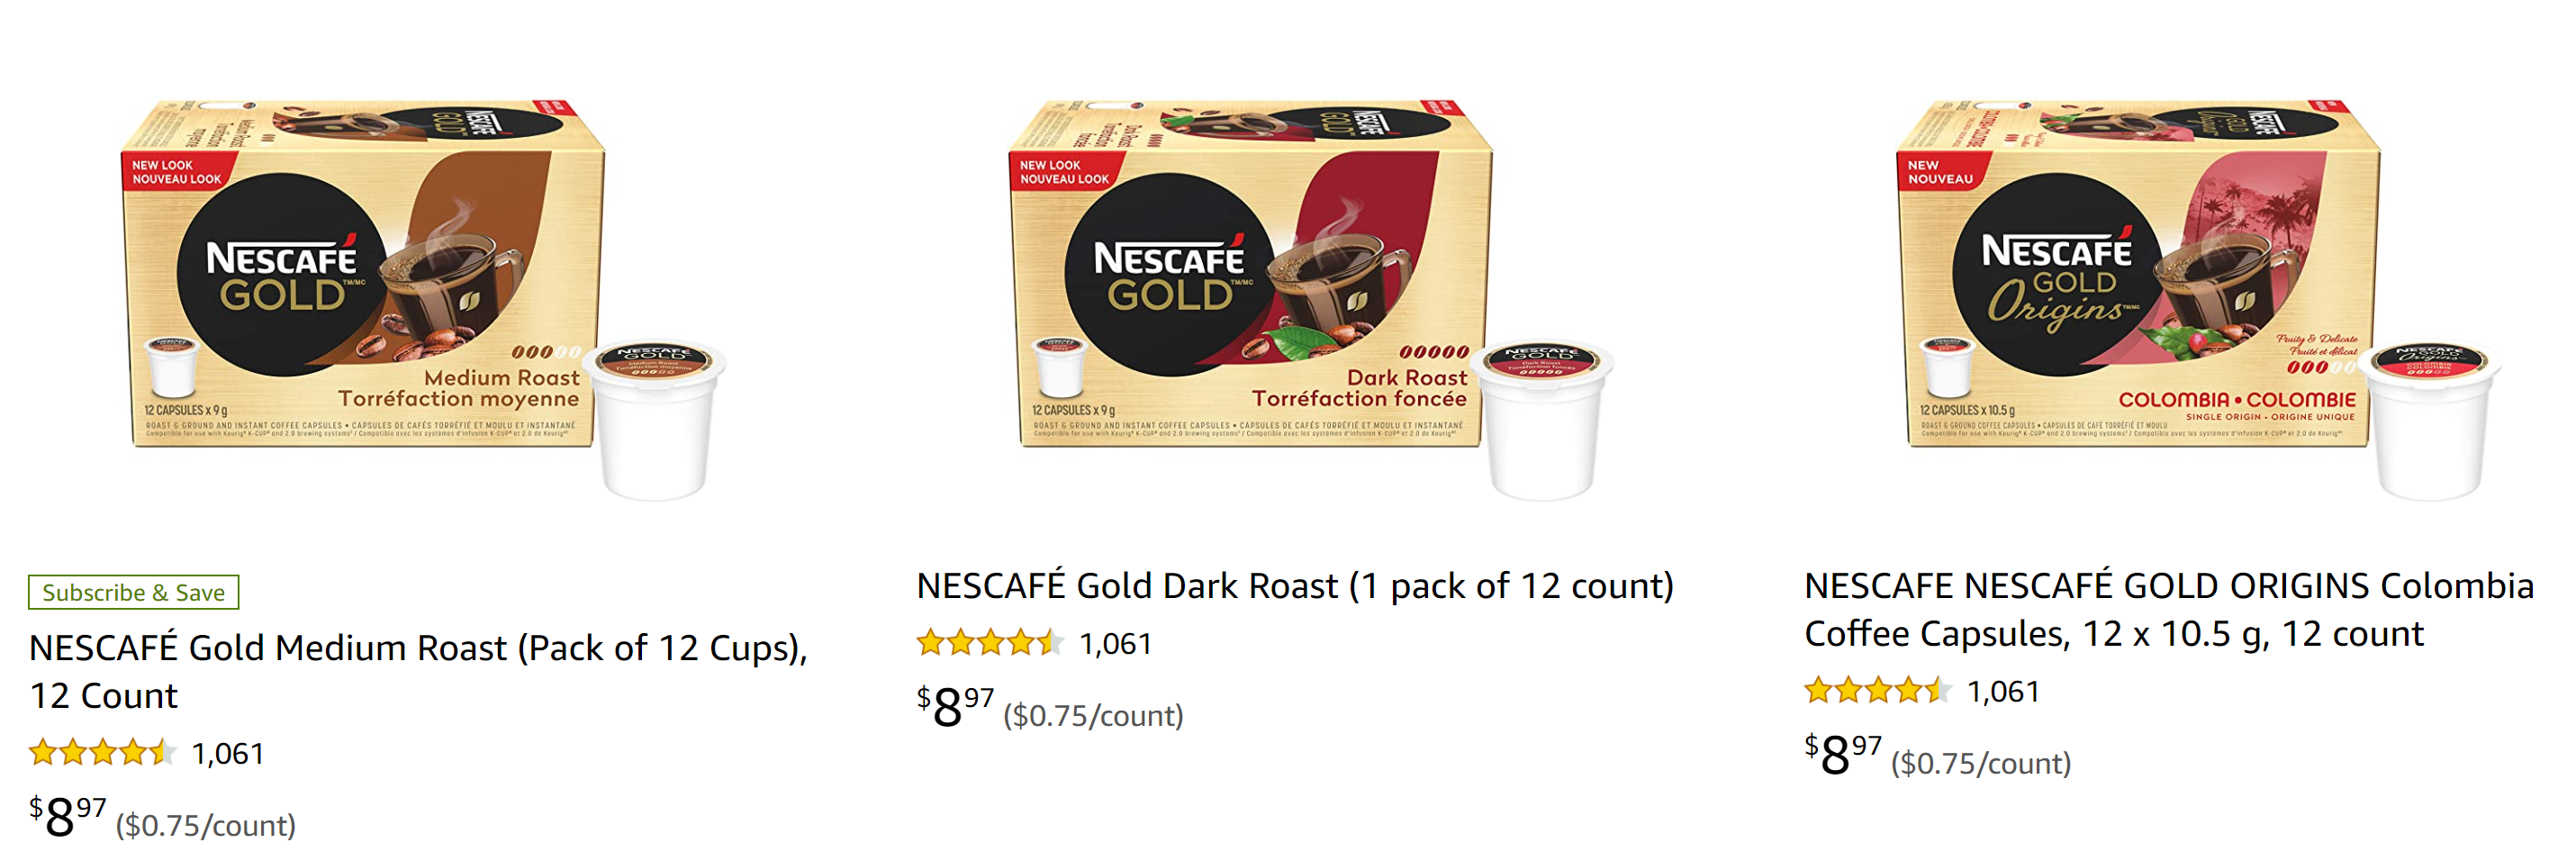 nestle-instant-coffee-as-low-as-77-percent-off-2-cans-of-golden-can-coffee-2849-2021-1-11